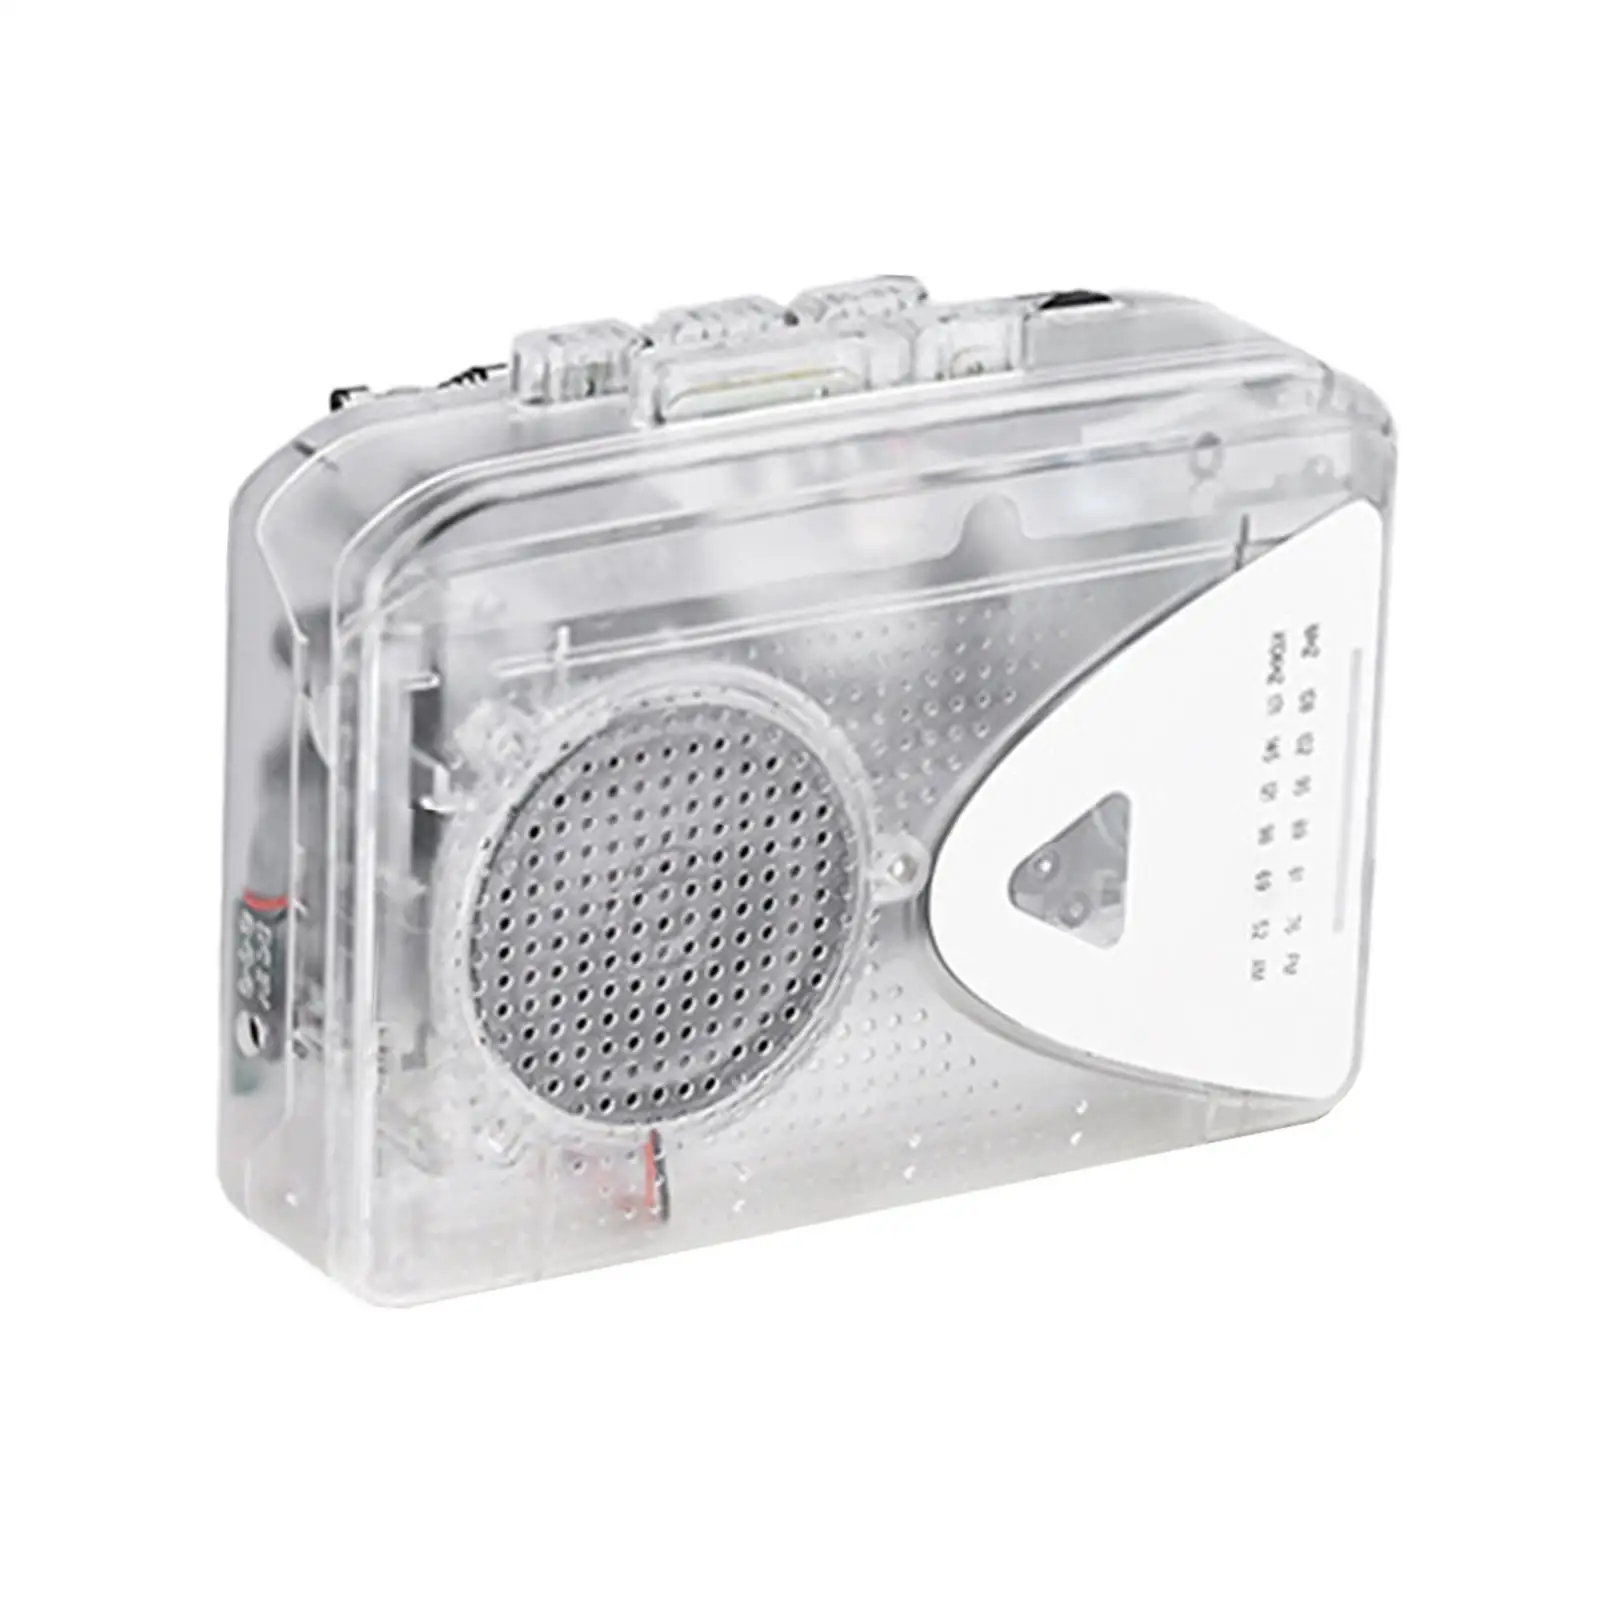 Cassette Player Portable Easy to Use with Headphones Transparent AM FM Radio